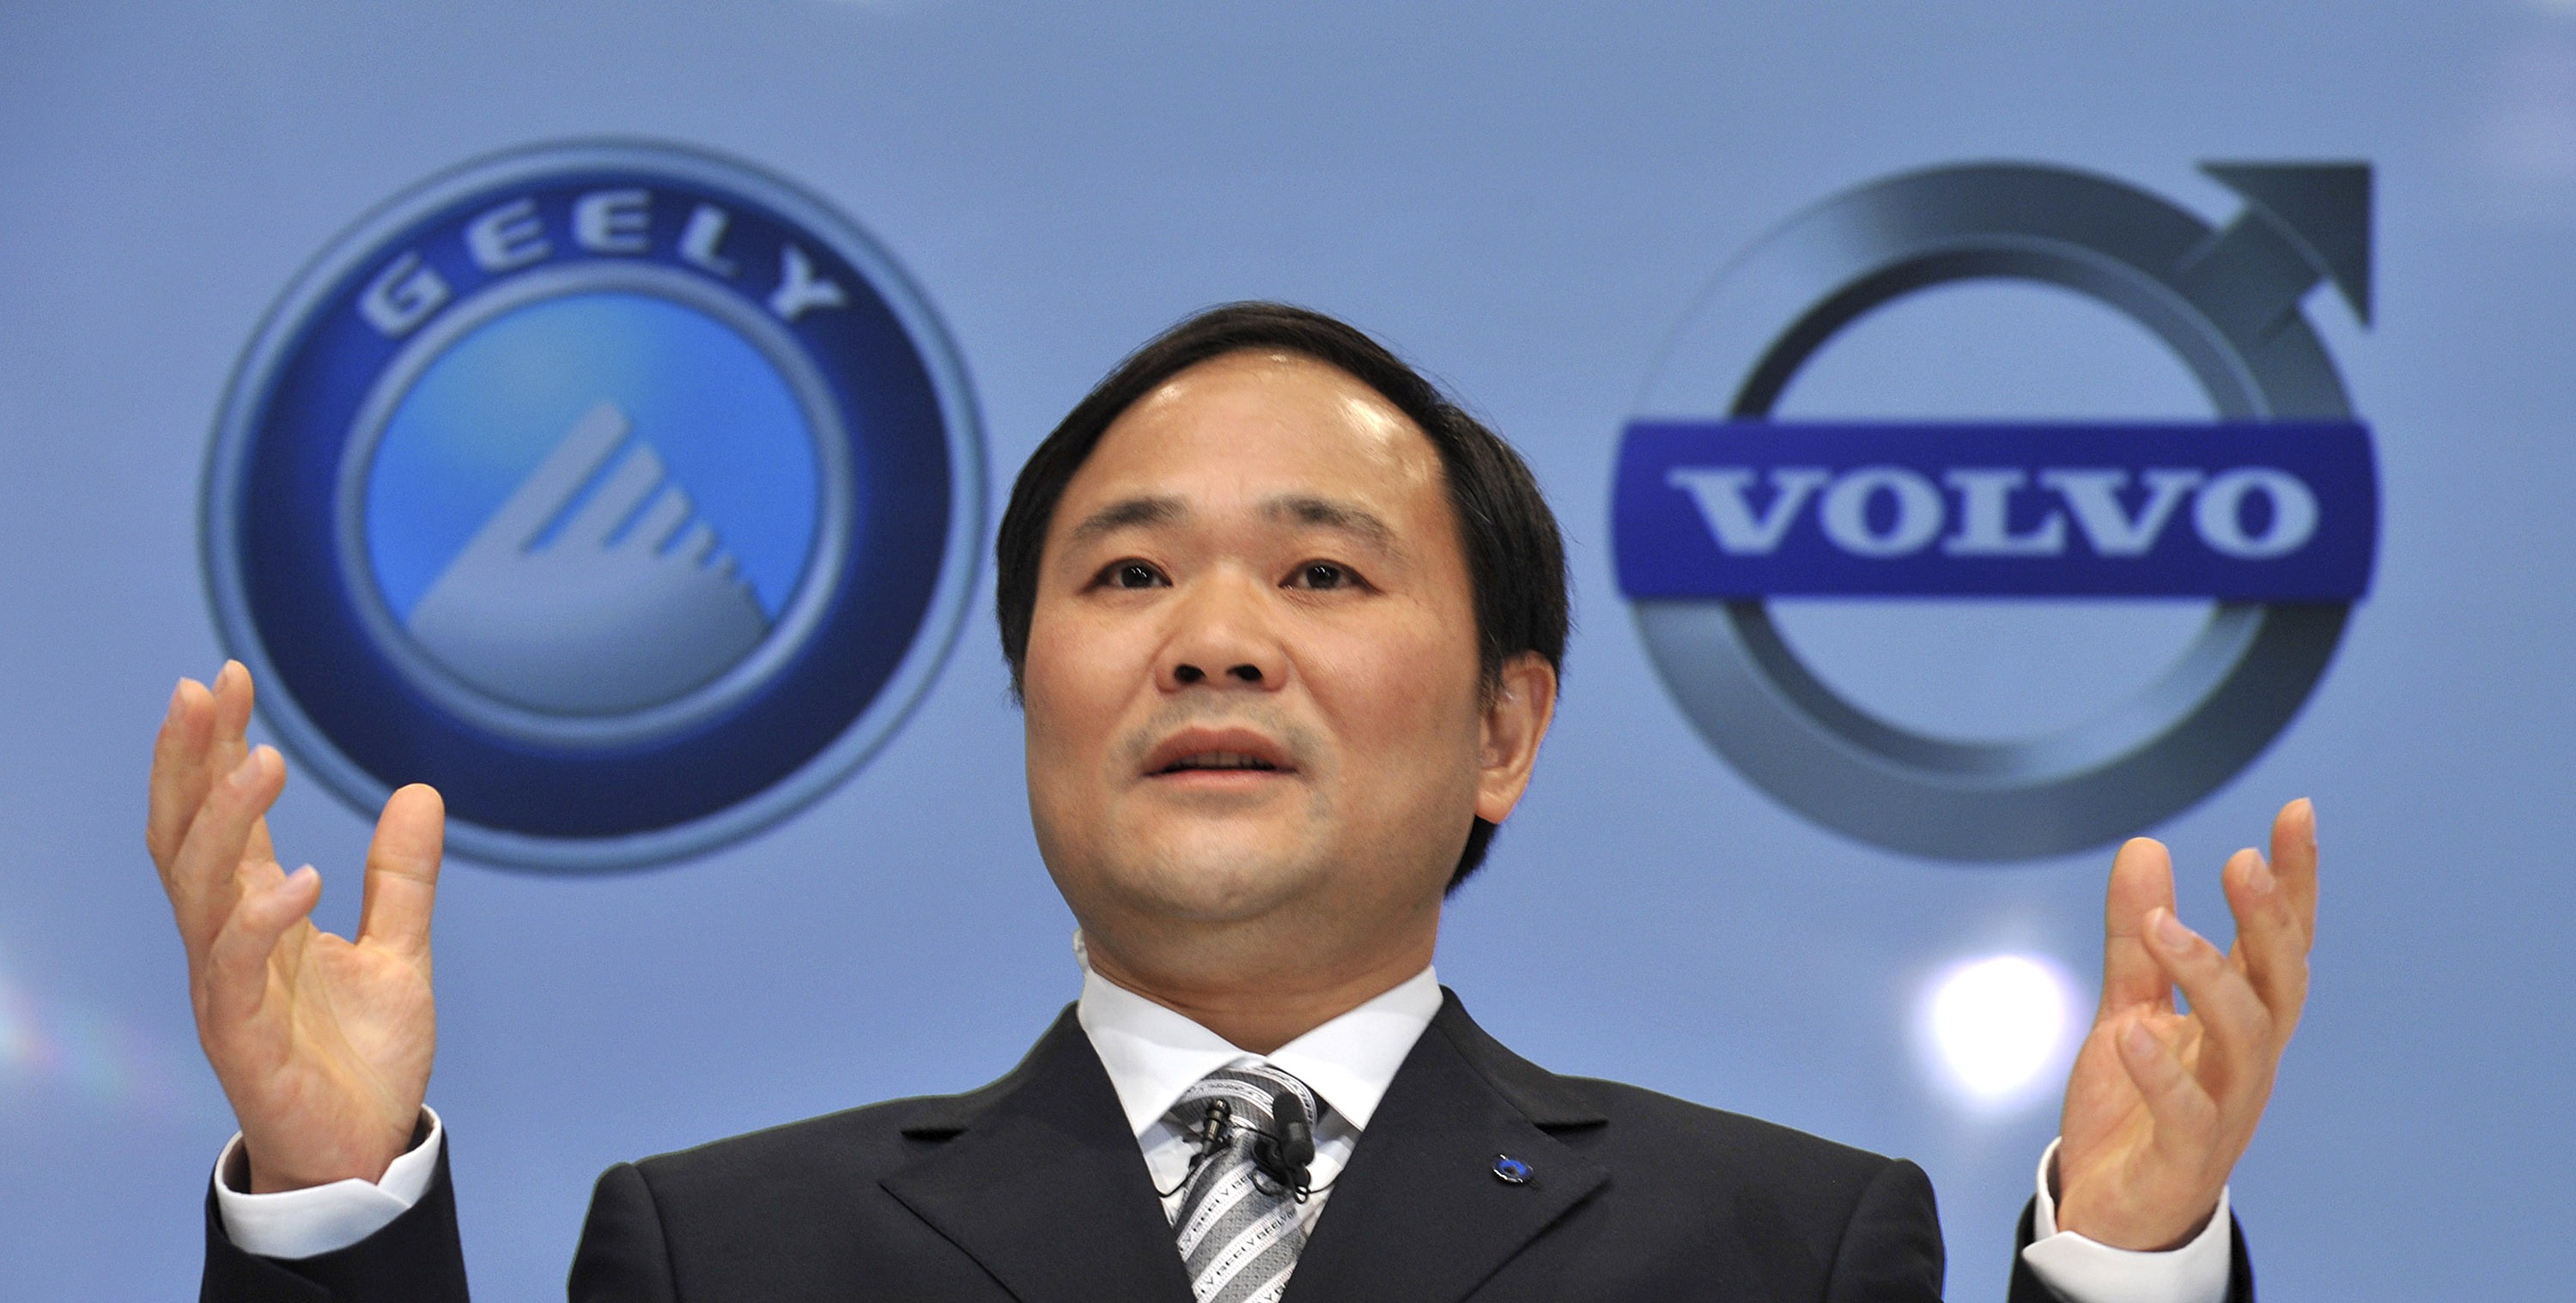 Li Shufu, chairman of Zhejiang Geely Holding Group, says the Chinese car company’s foray in the satellite industry forms part of efforts to become a global technology leader. Photo: AP